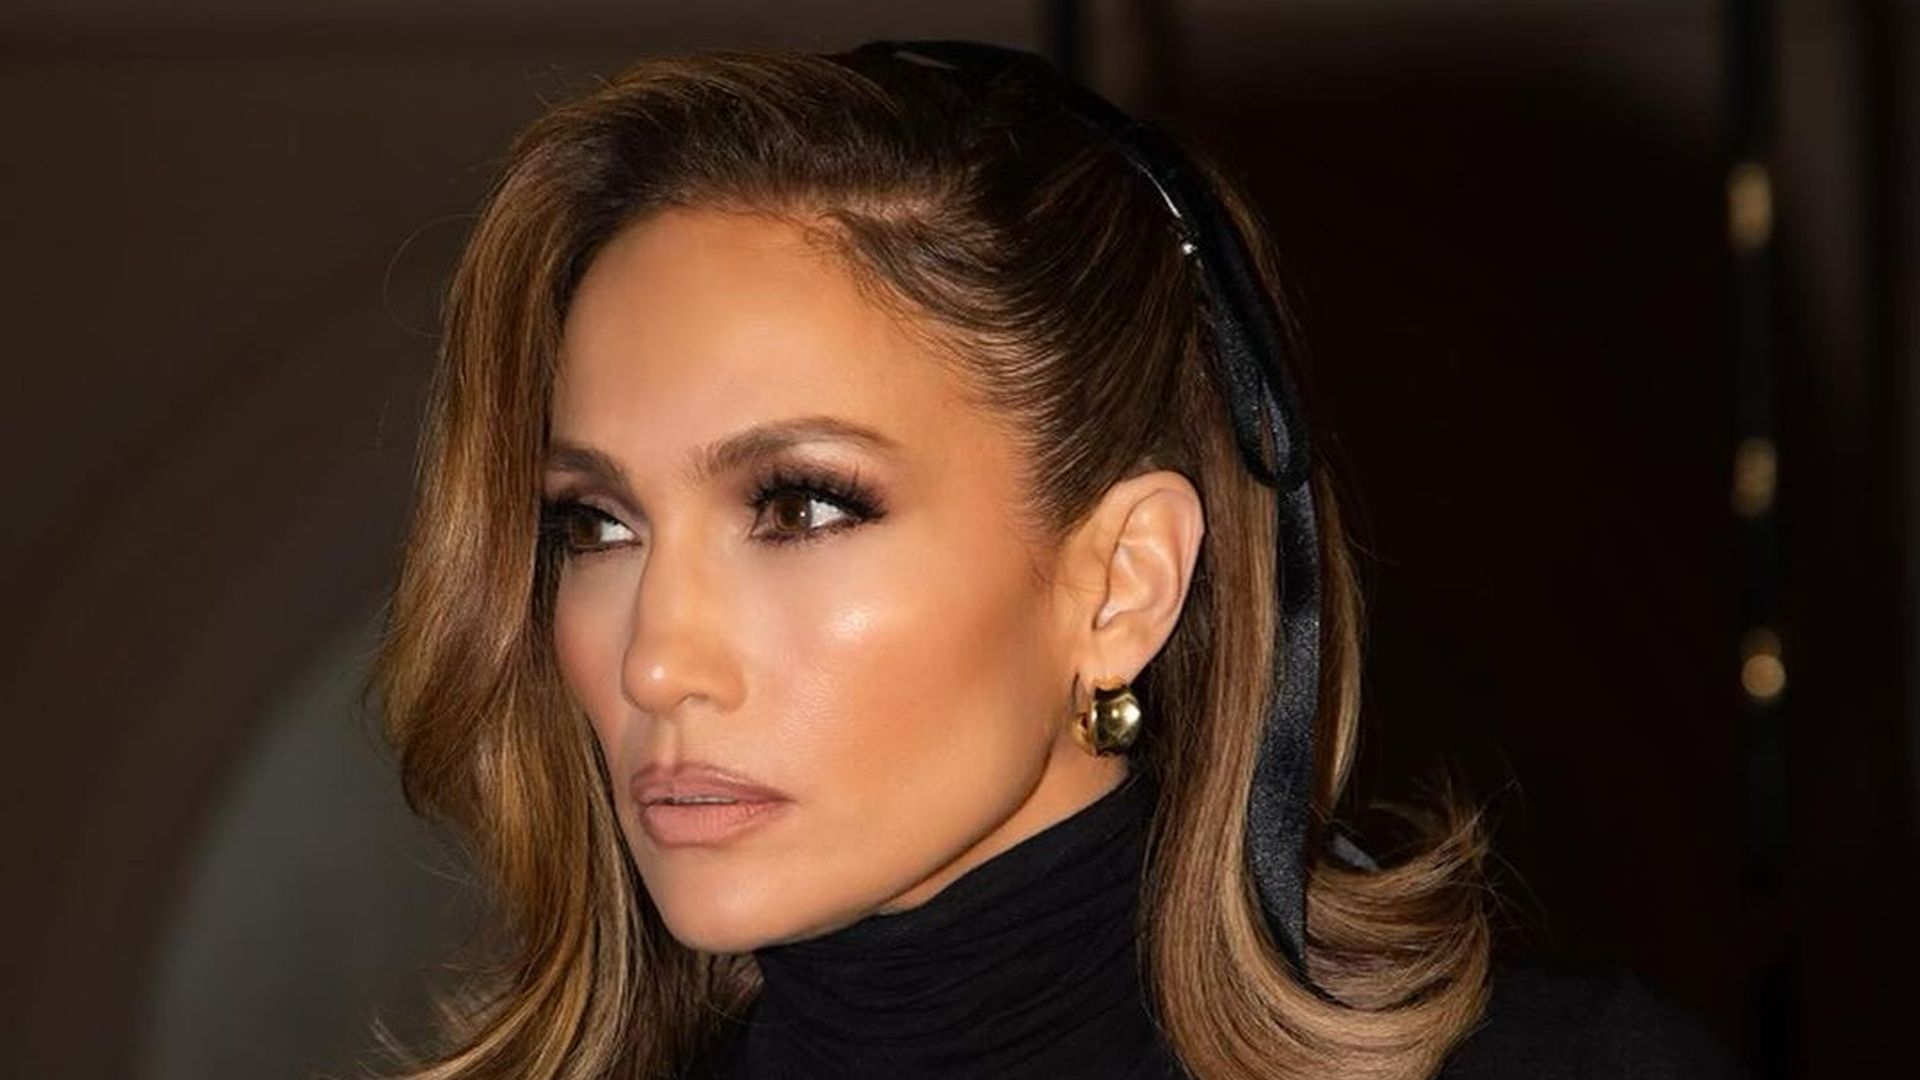 Jennifer Lopez shares an image of her hairstyle to her Instagram. She wears a black turtleneck under a white corset top